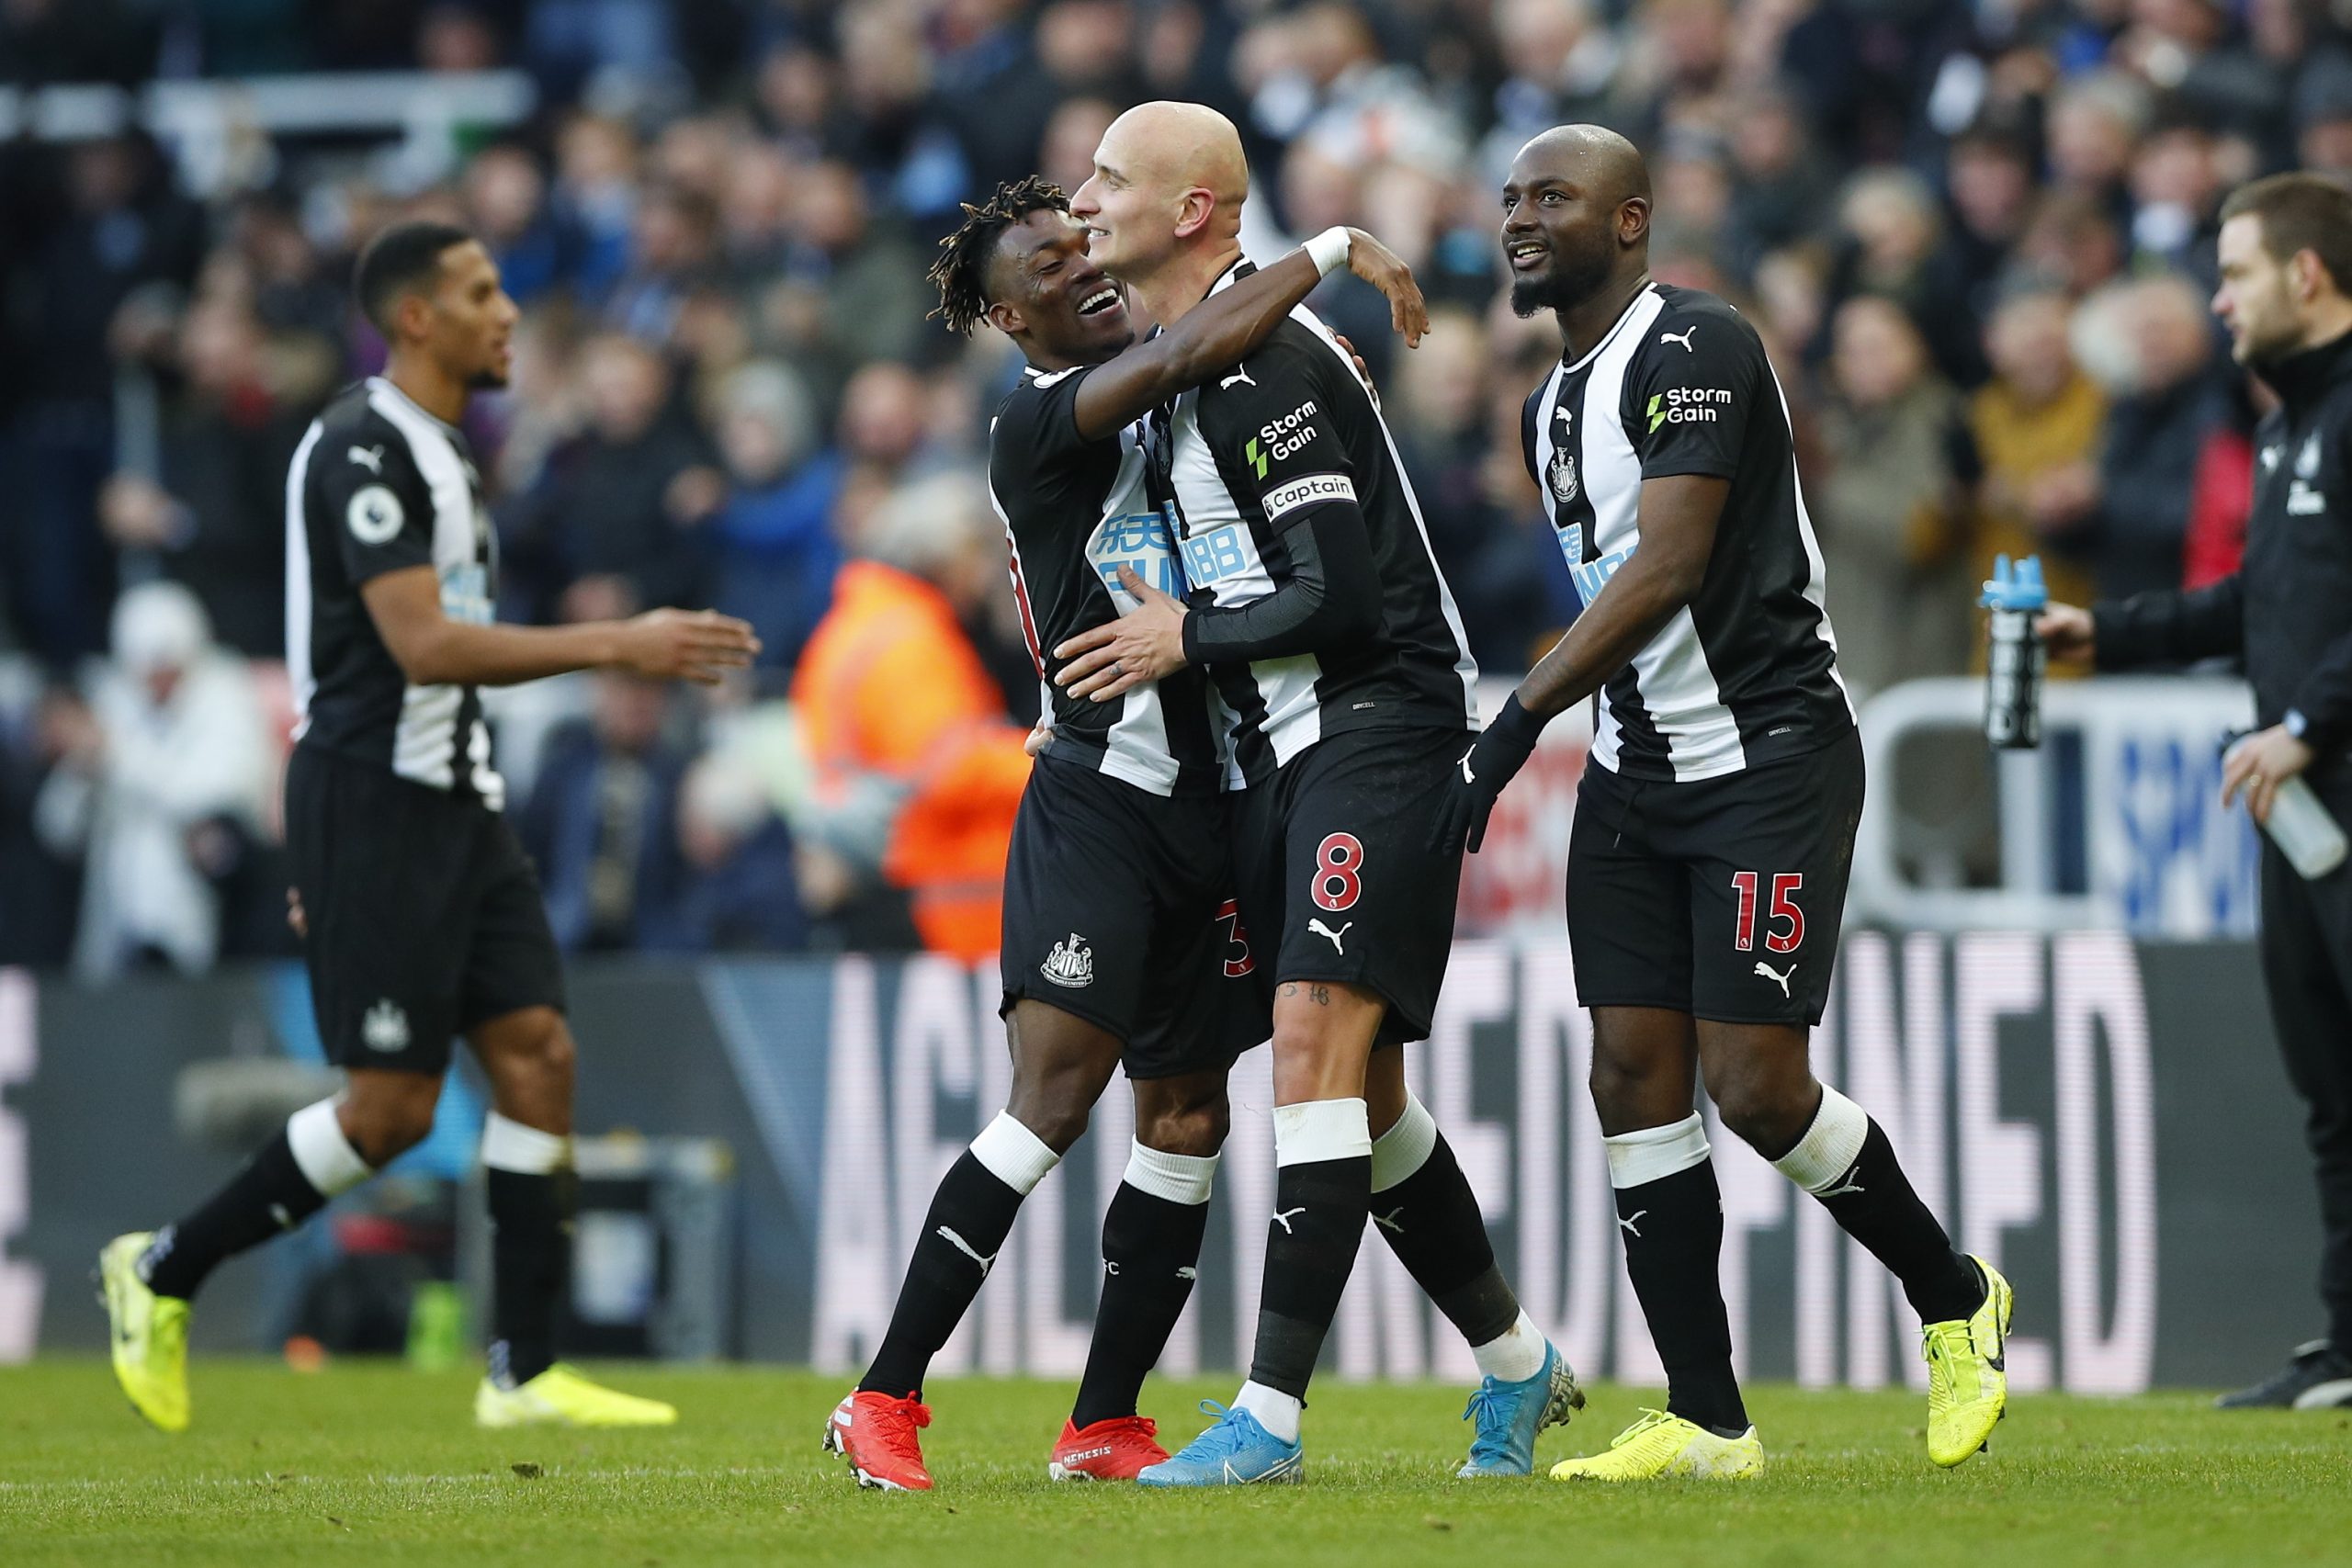 epa08035012 Newcastle's Jonjo Shelvey celebrates after scoring a goal during the English Premier League soccer match between Newcastle United and Manchester City in Newcastle, Britain, 30 November 2019.  EPA/Lynne Cameron EDITORIAL USE ONLY. No use with unauthorized audio, video, data, fixture lists, club/league logos or 'live' services. Online in-match use limited to 120 images, no video emulation. No use in betting, games or single club/league/player publications